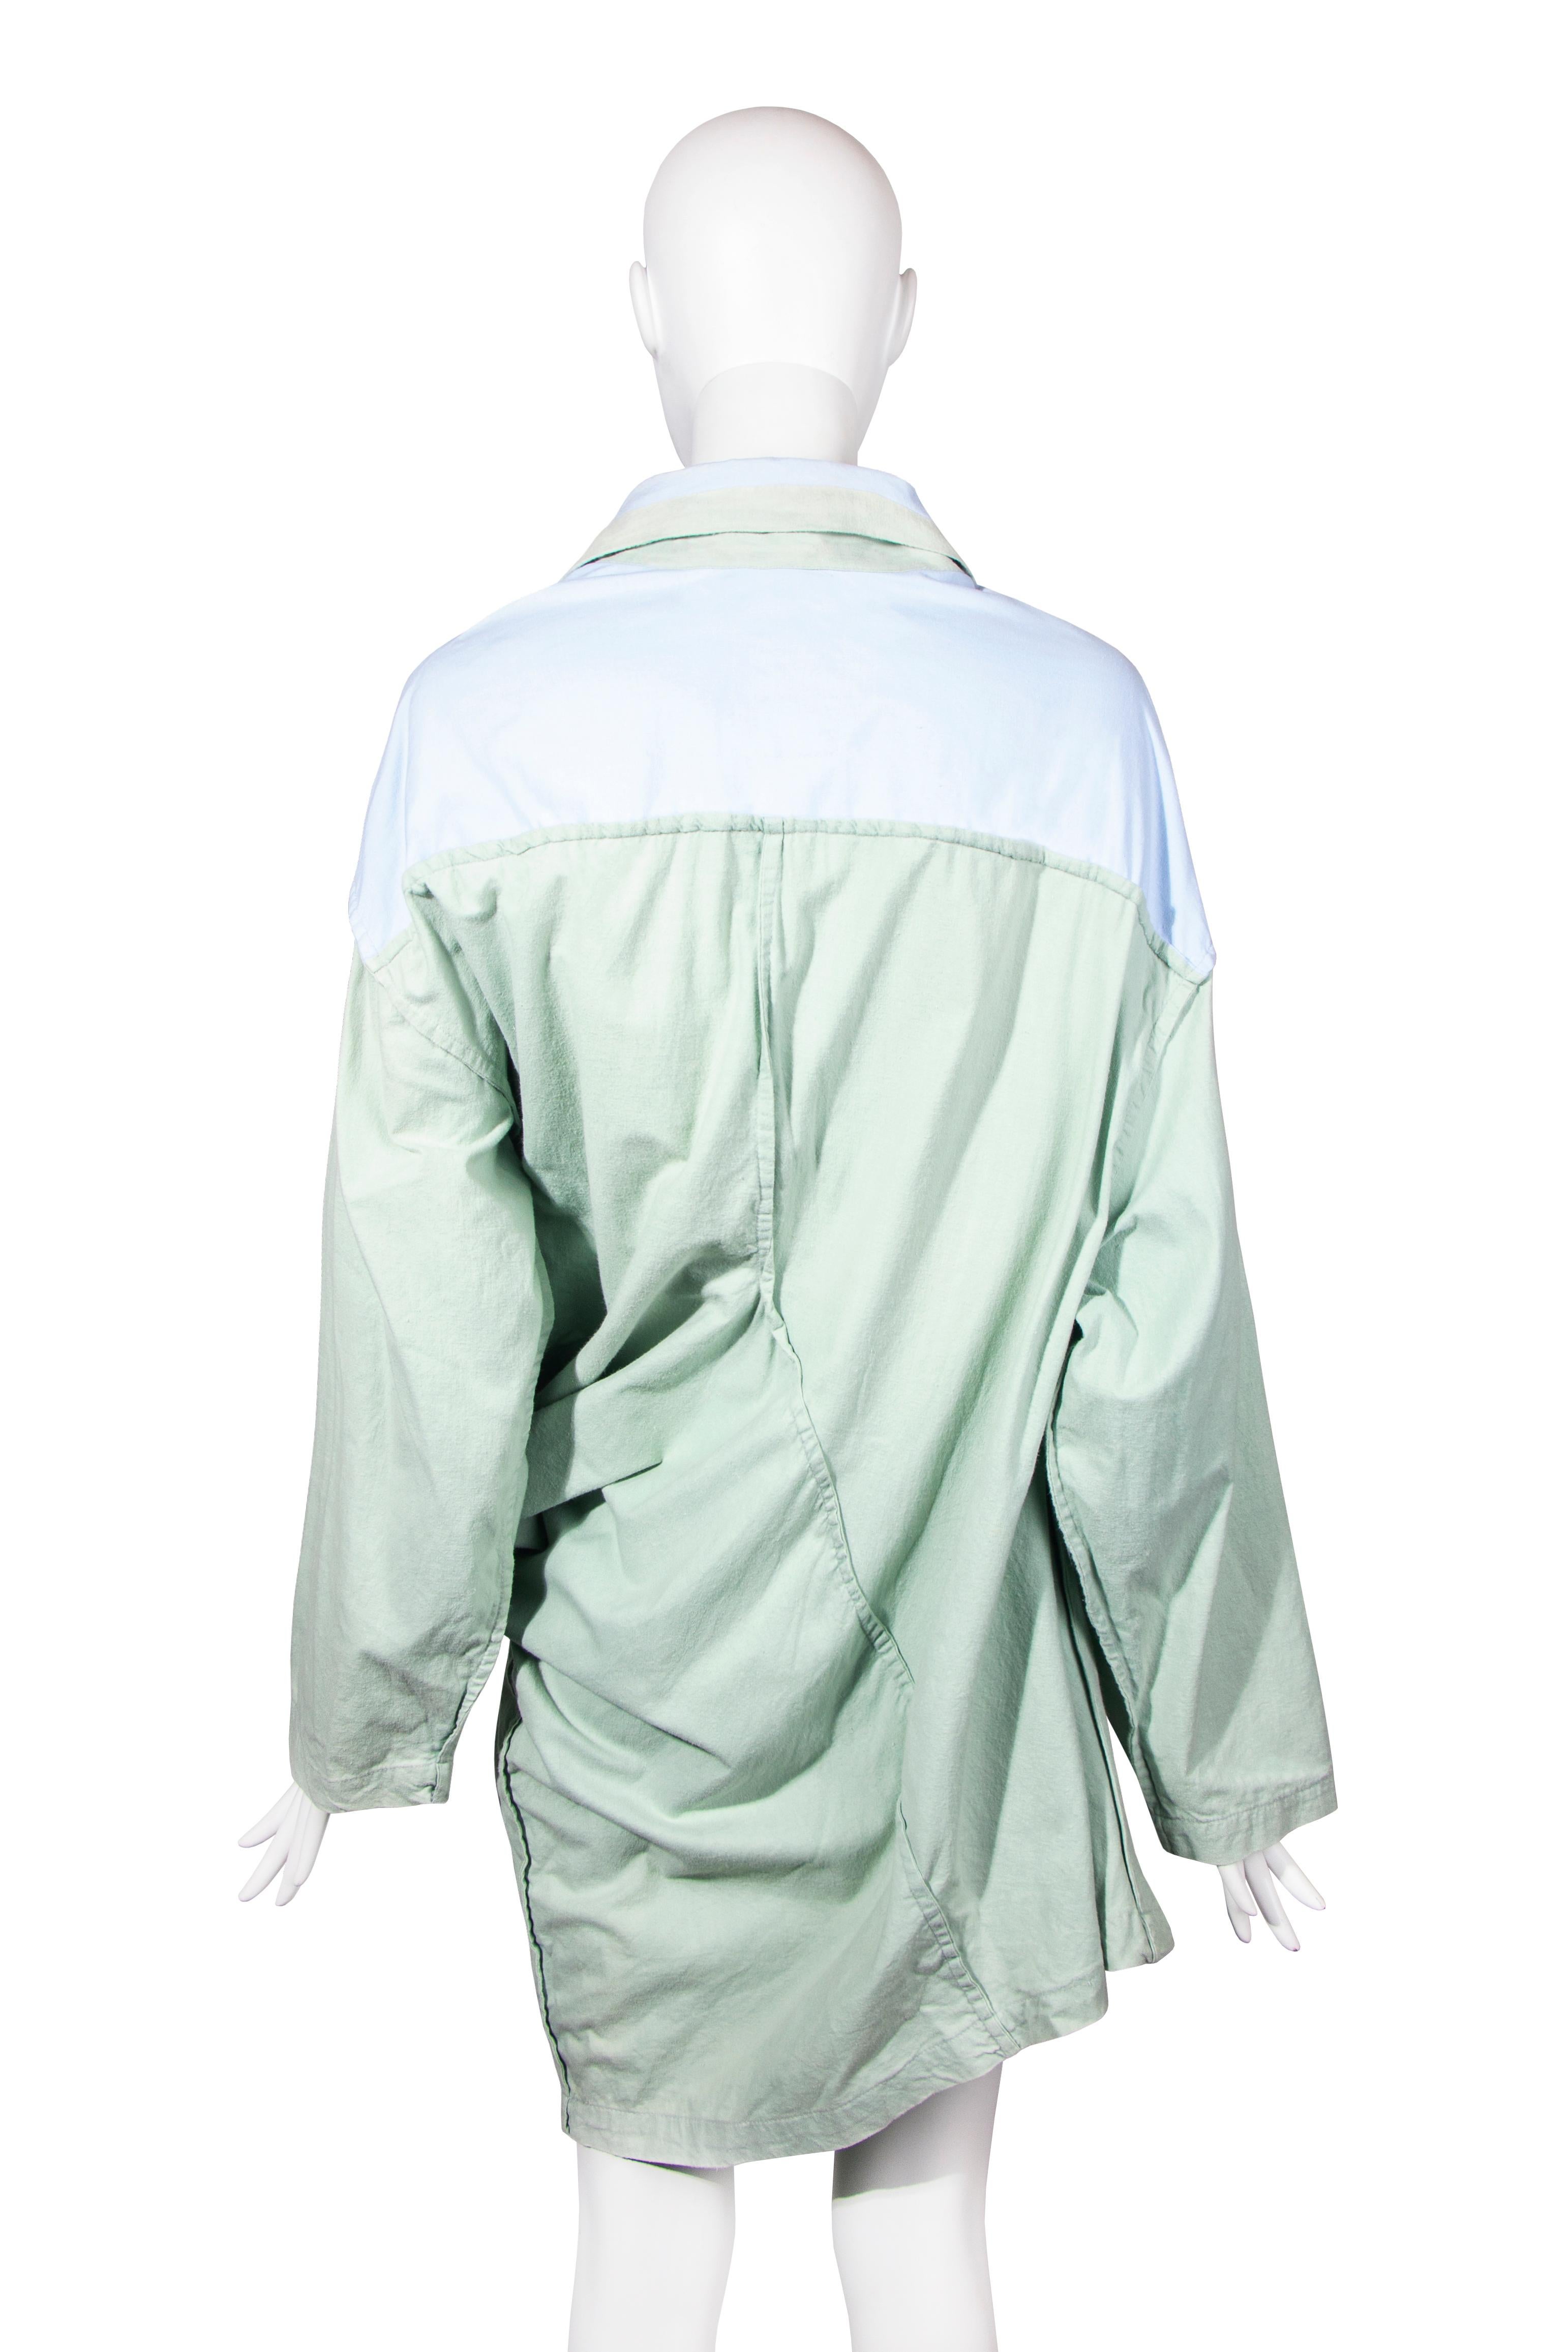 John Galliano 'The Ludic Games' spencer jacket & oversized shirt pair, fw 1985 For Sale 10